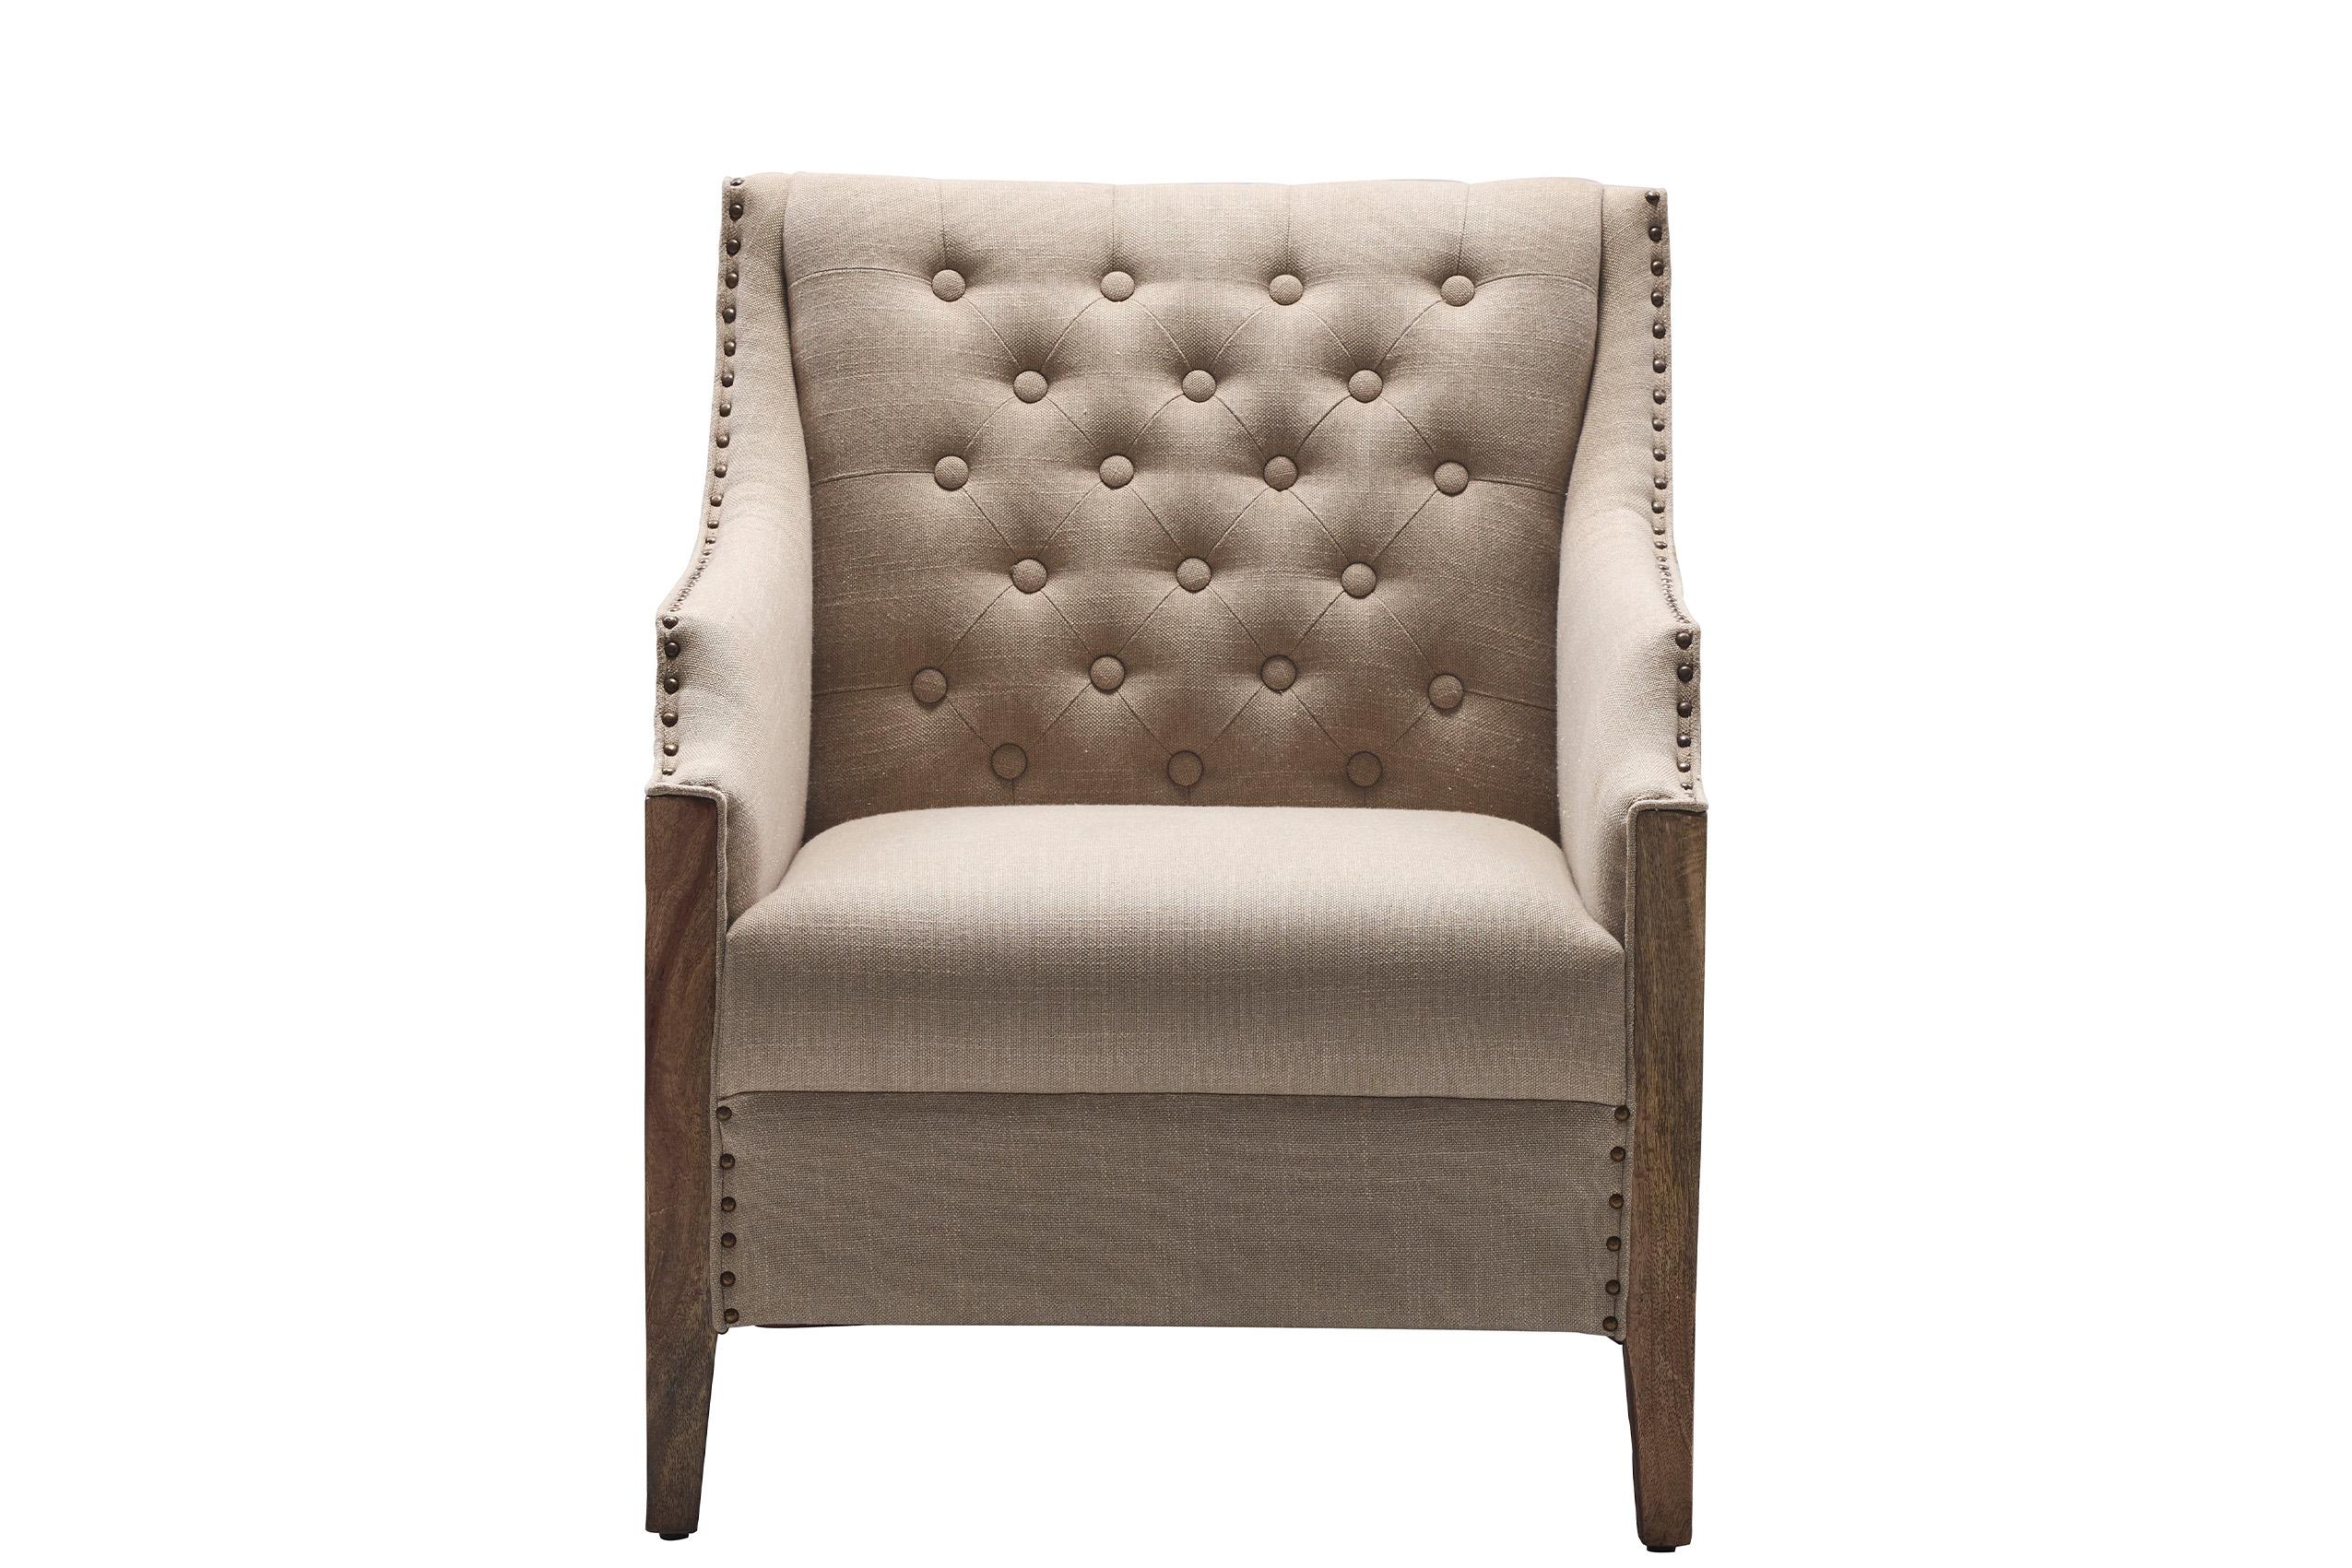 Classic Arm Chair CAC-51004 CAC-51004 in Beige Fabric